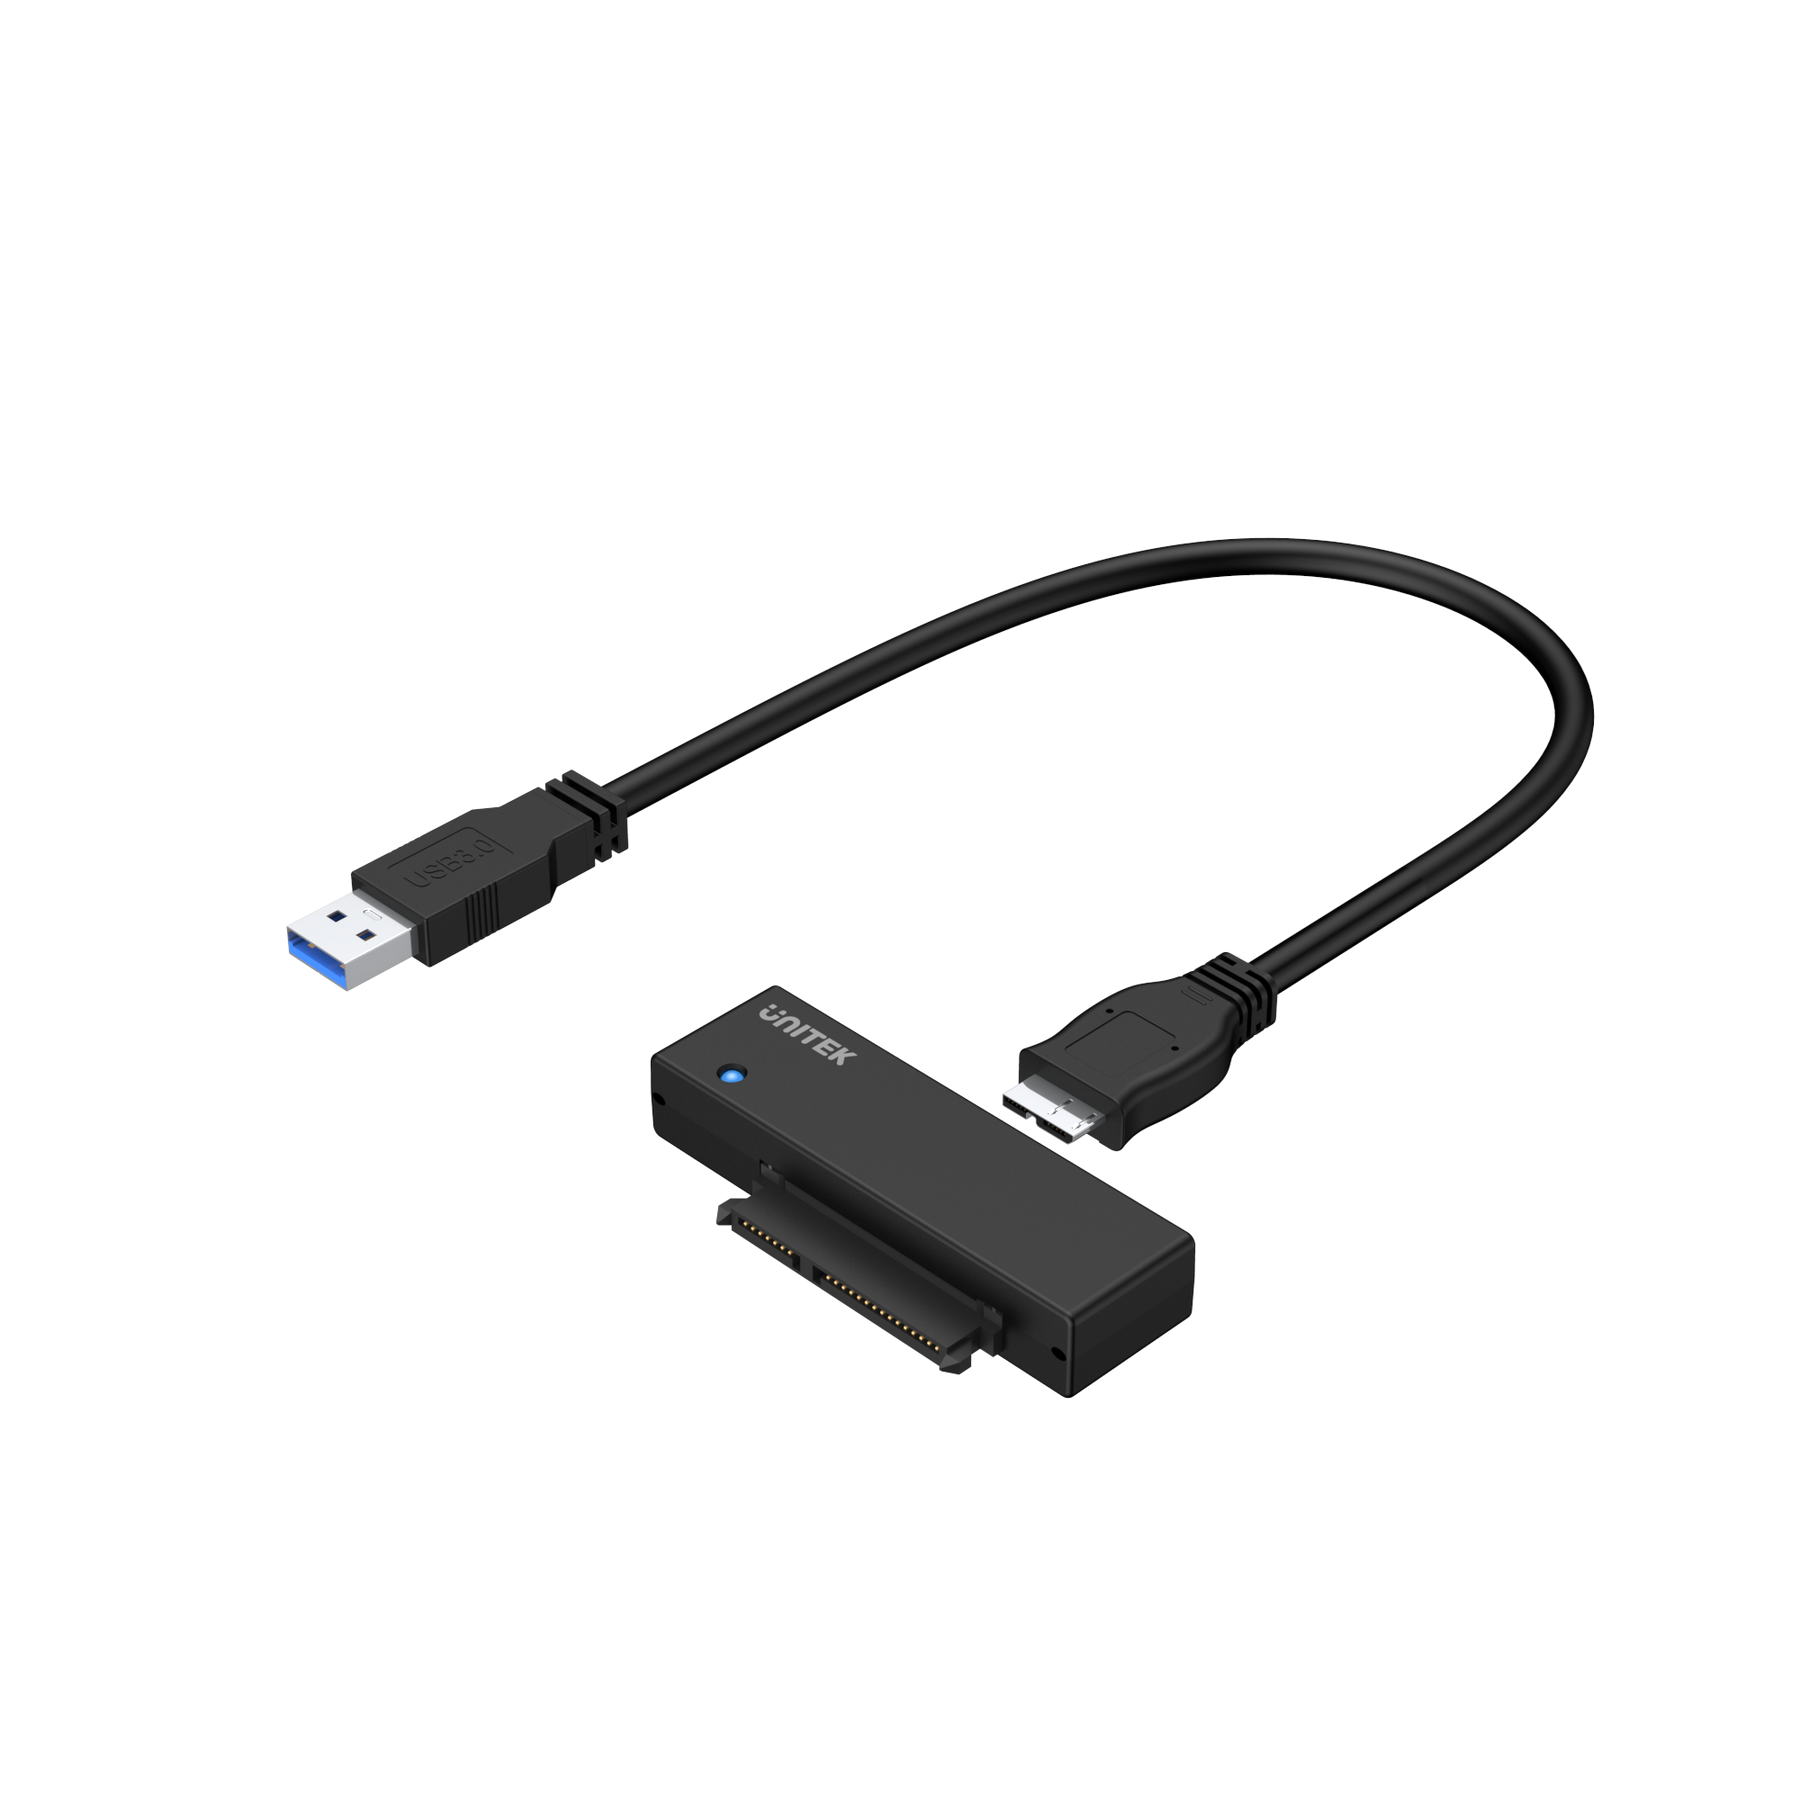 USB 3.0 to SATA III Adapter (With 12V2A Power Adapter)